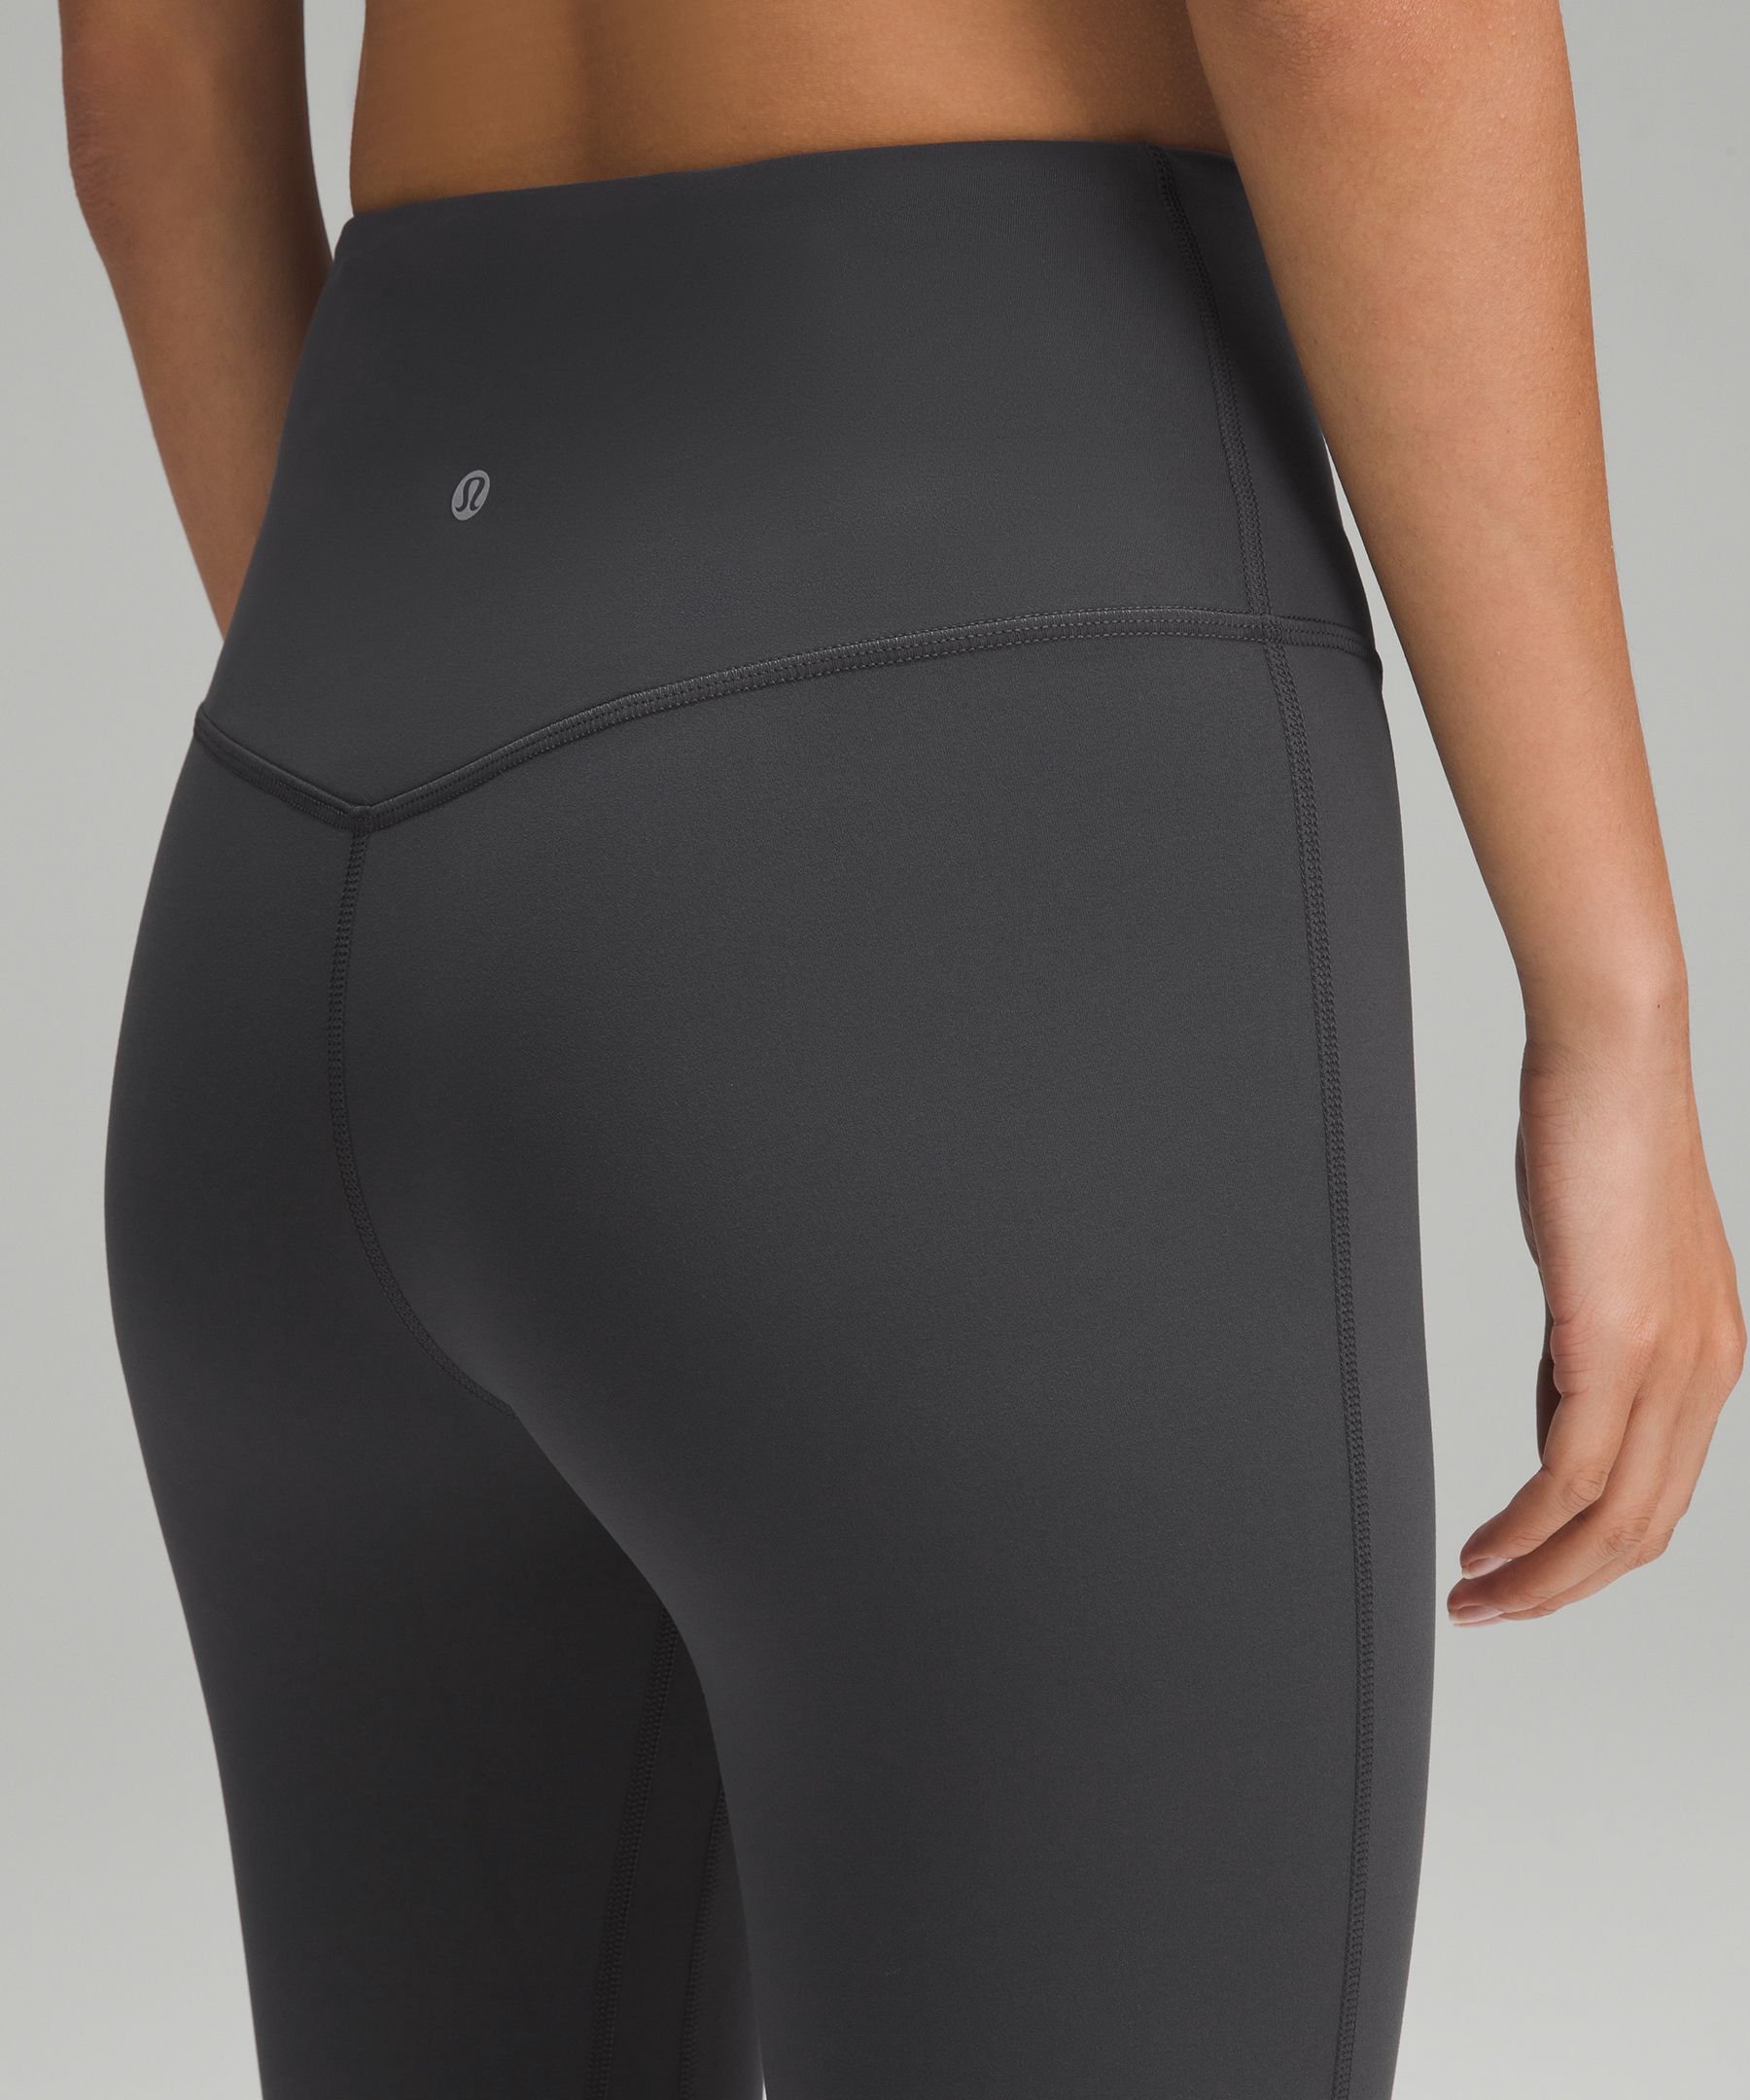 Lulus 2023 Designer Womens Align Flare Leggings Crossover Knee Length Yoga  Shorts With High Waist And Elastic Fit For Gym, Fitness, And Outdoor Sports  CDG9 From Corteiz22, $16.86